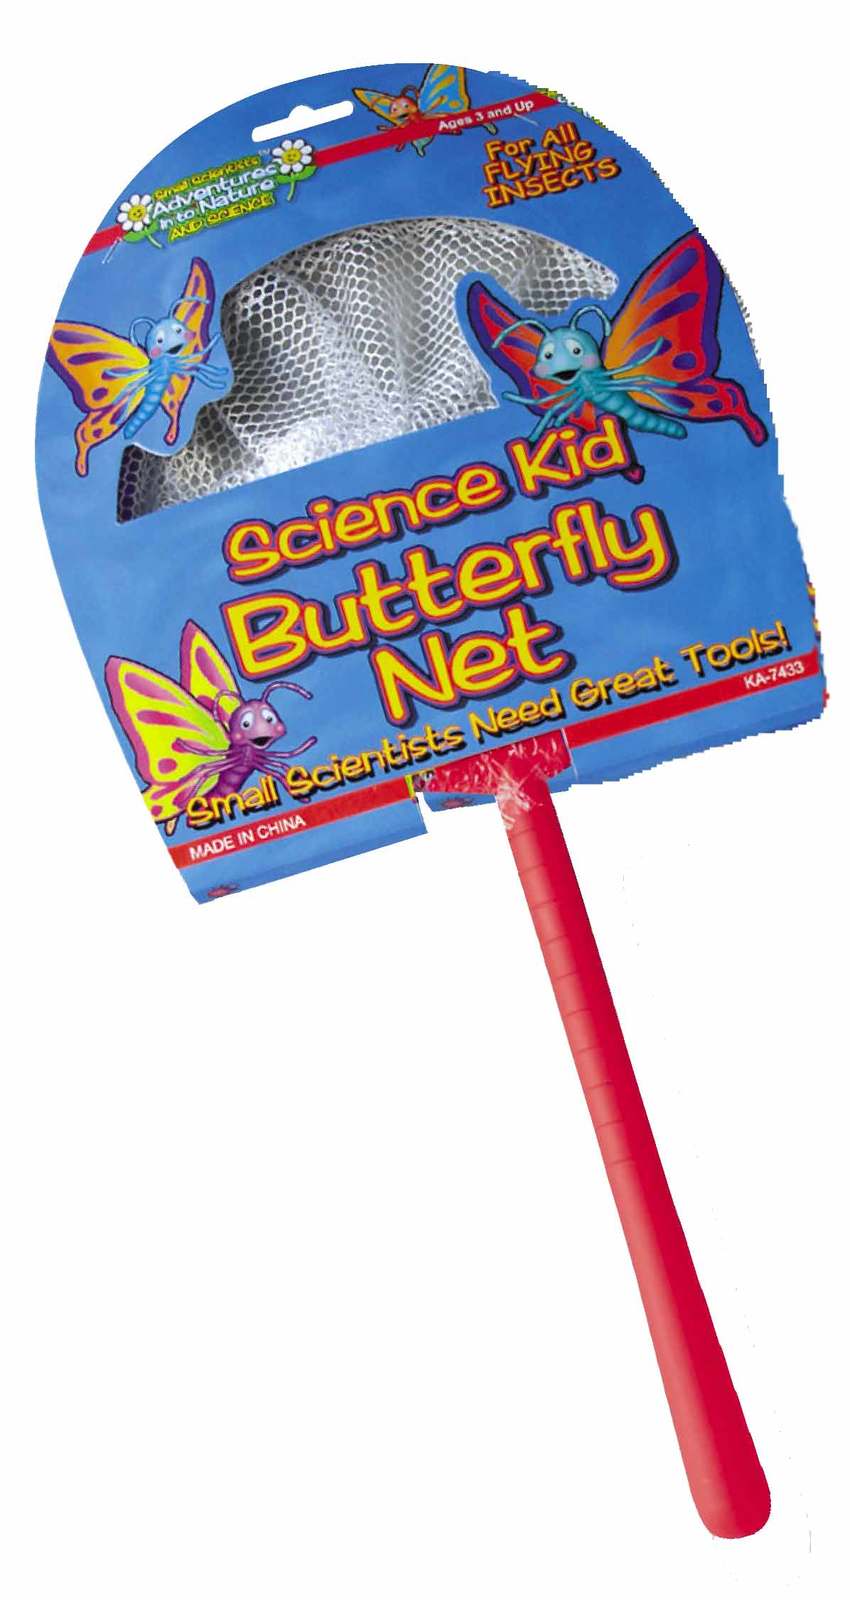 'Science Kid' Butterfly Net - The Present Factory